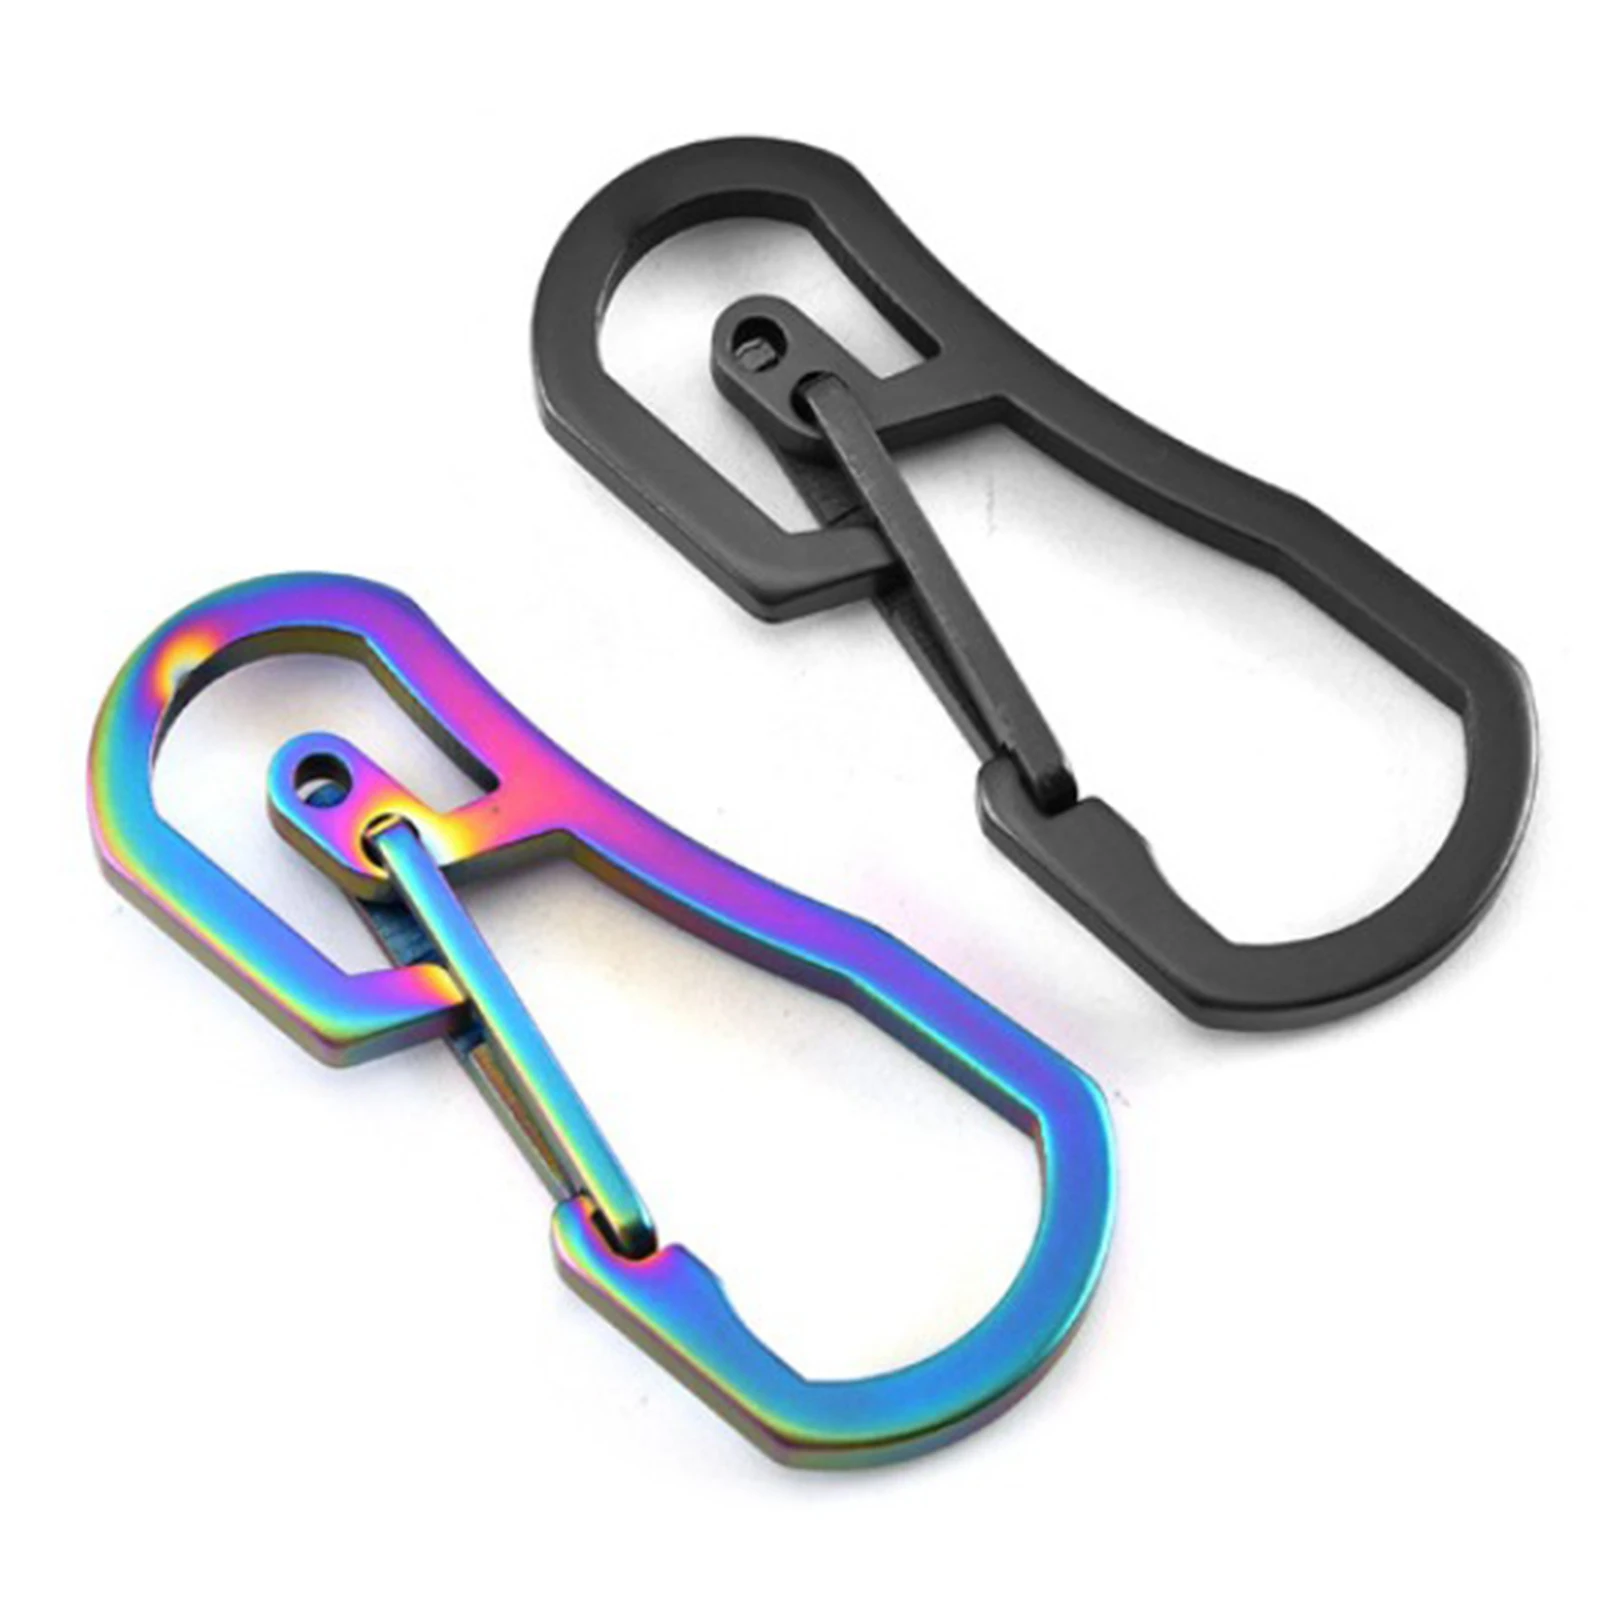 Stainless Steel Climbing Carabiner Key-Chain Clip Hook Buckle Keychain Key Ring 